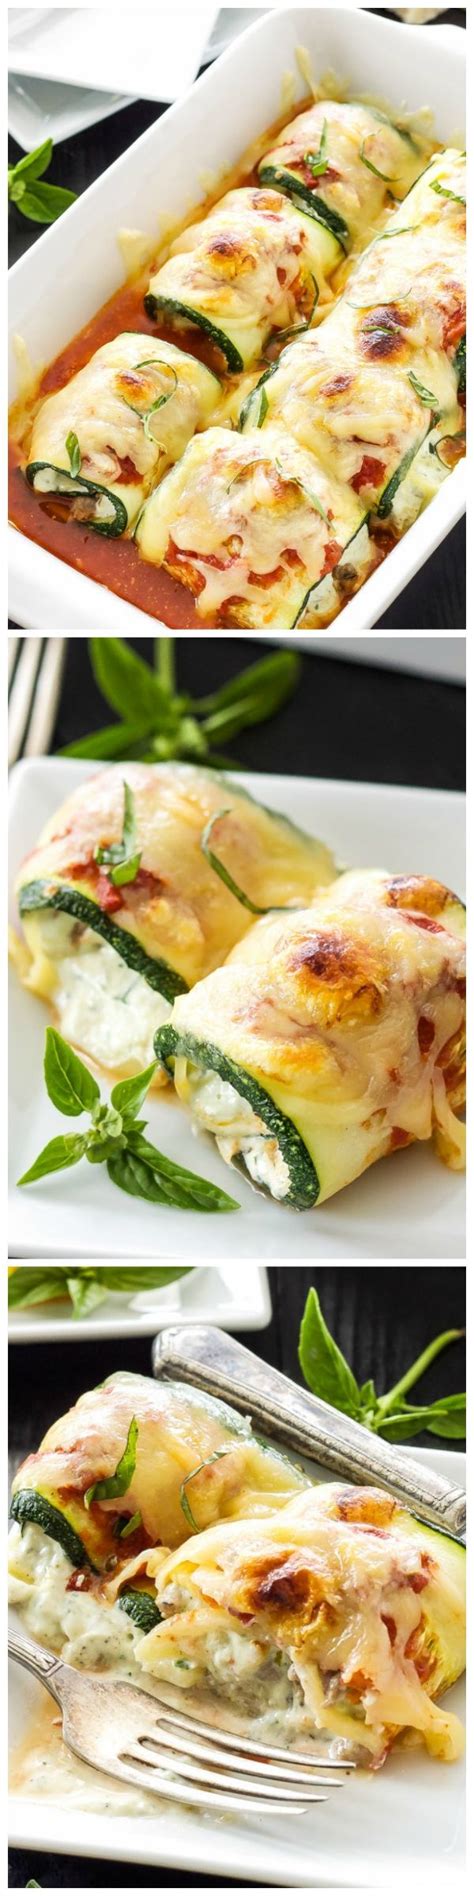 Delicious Lasagna Rolls Made Using Zucchini Instead Of Pasta A Healthy